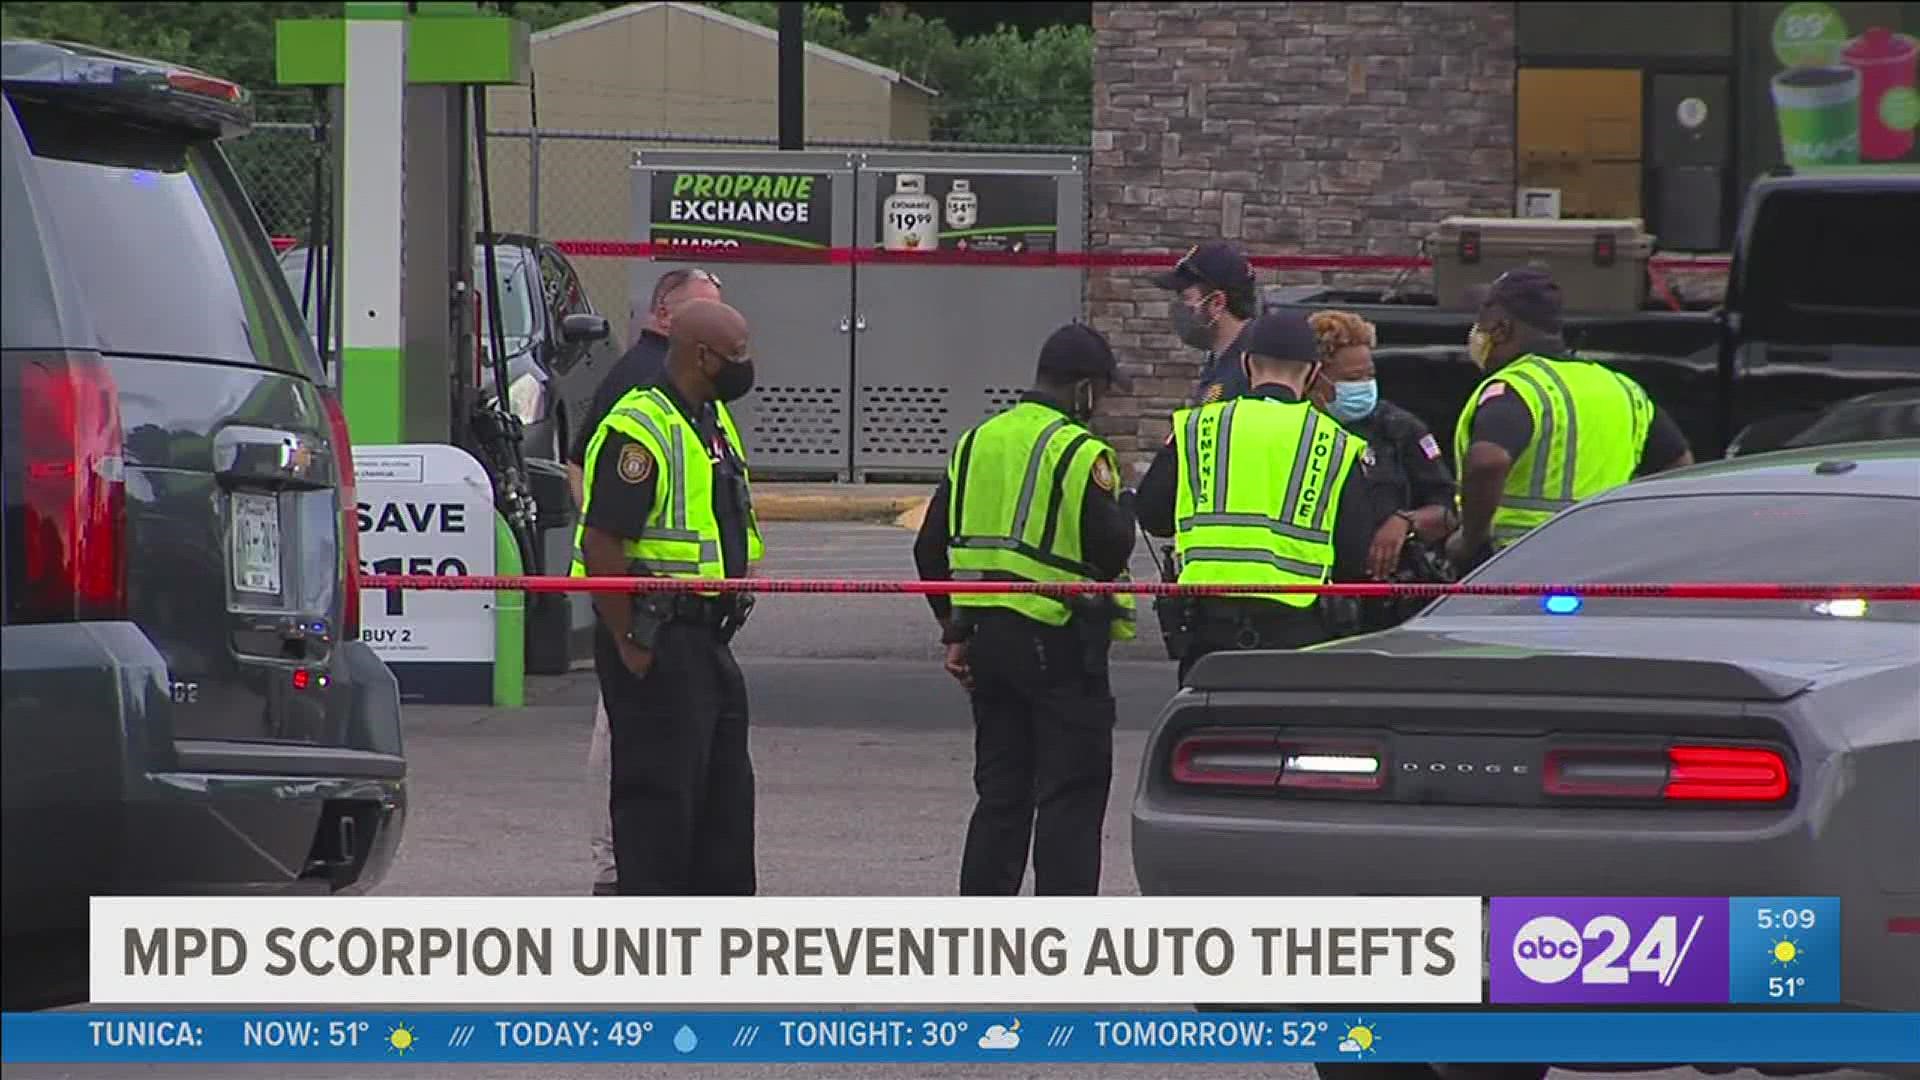 The police department unit was launched to stop various crimes, especially auto thefts, across the city of Memphis.